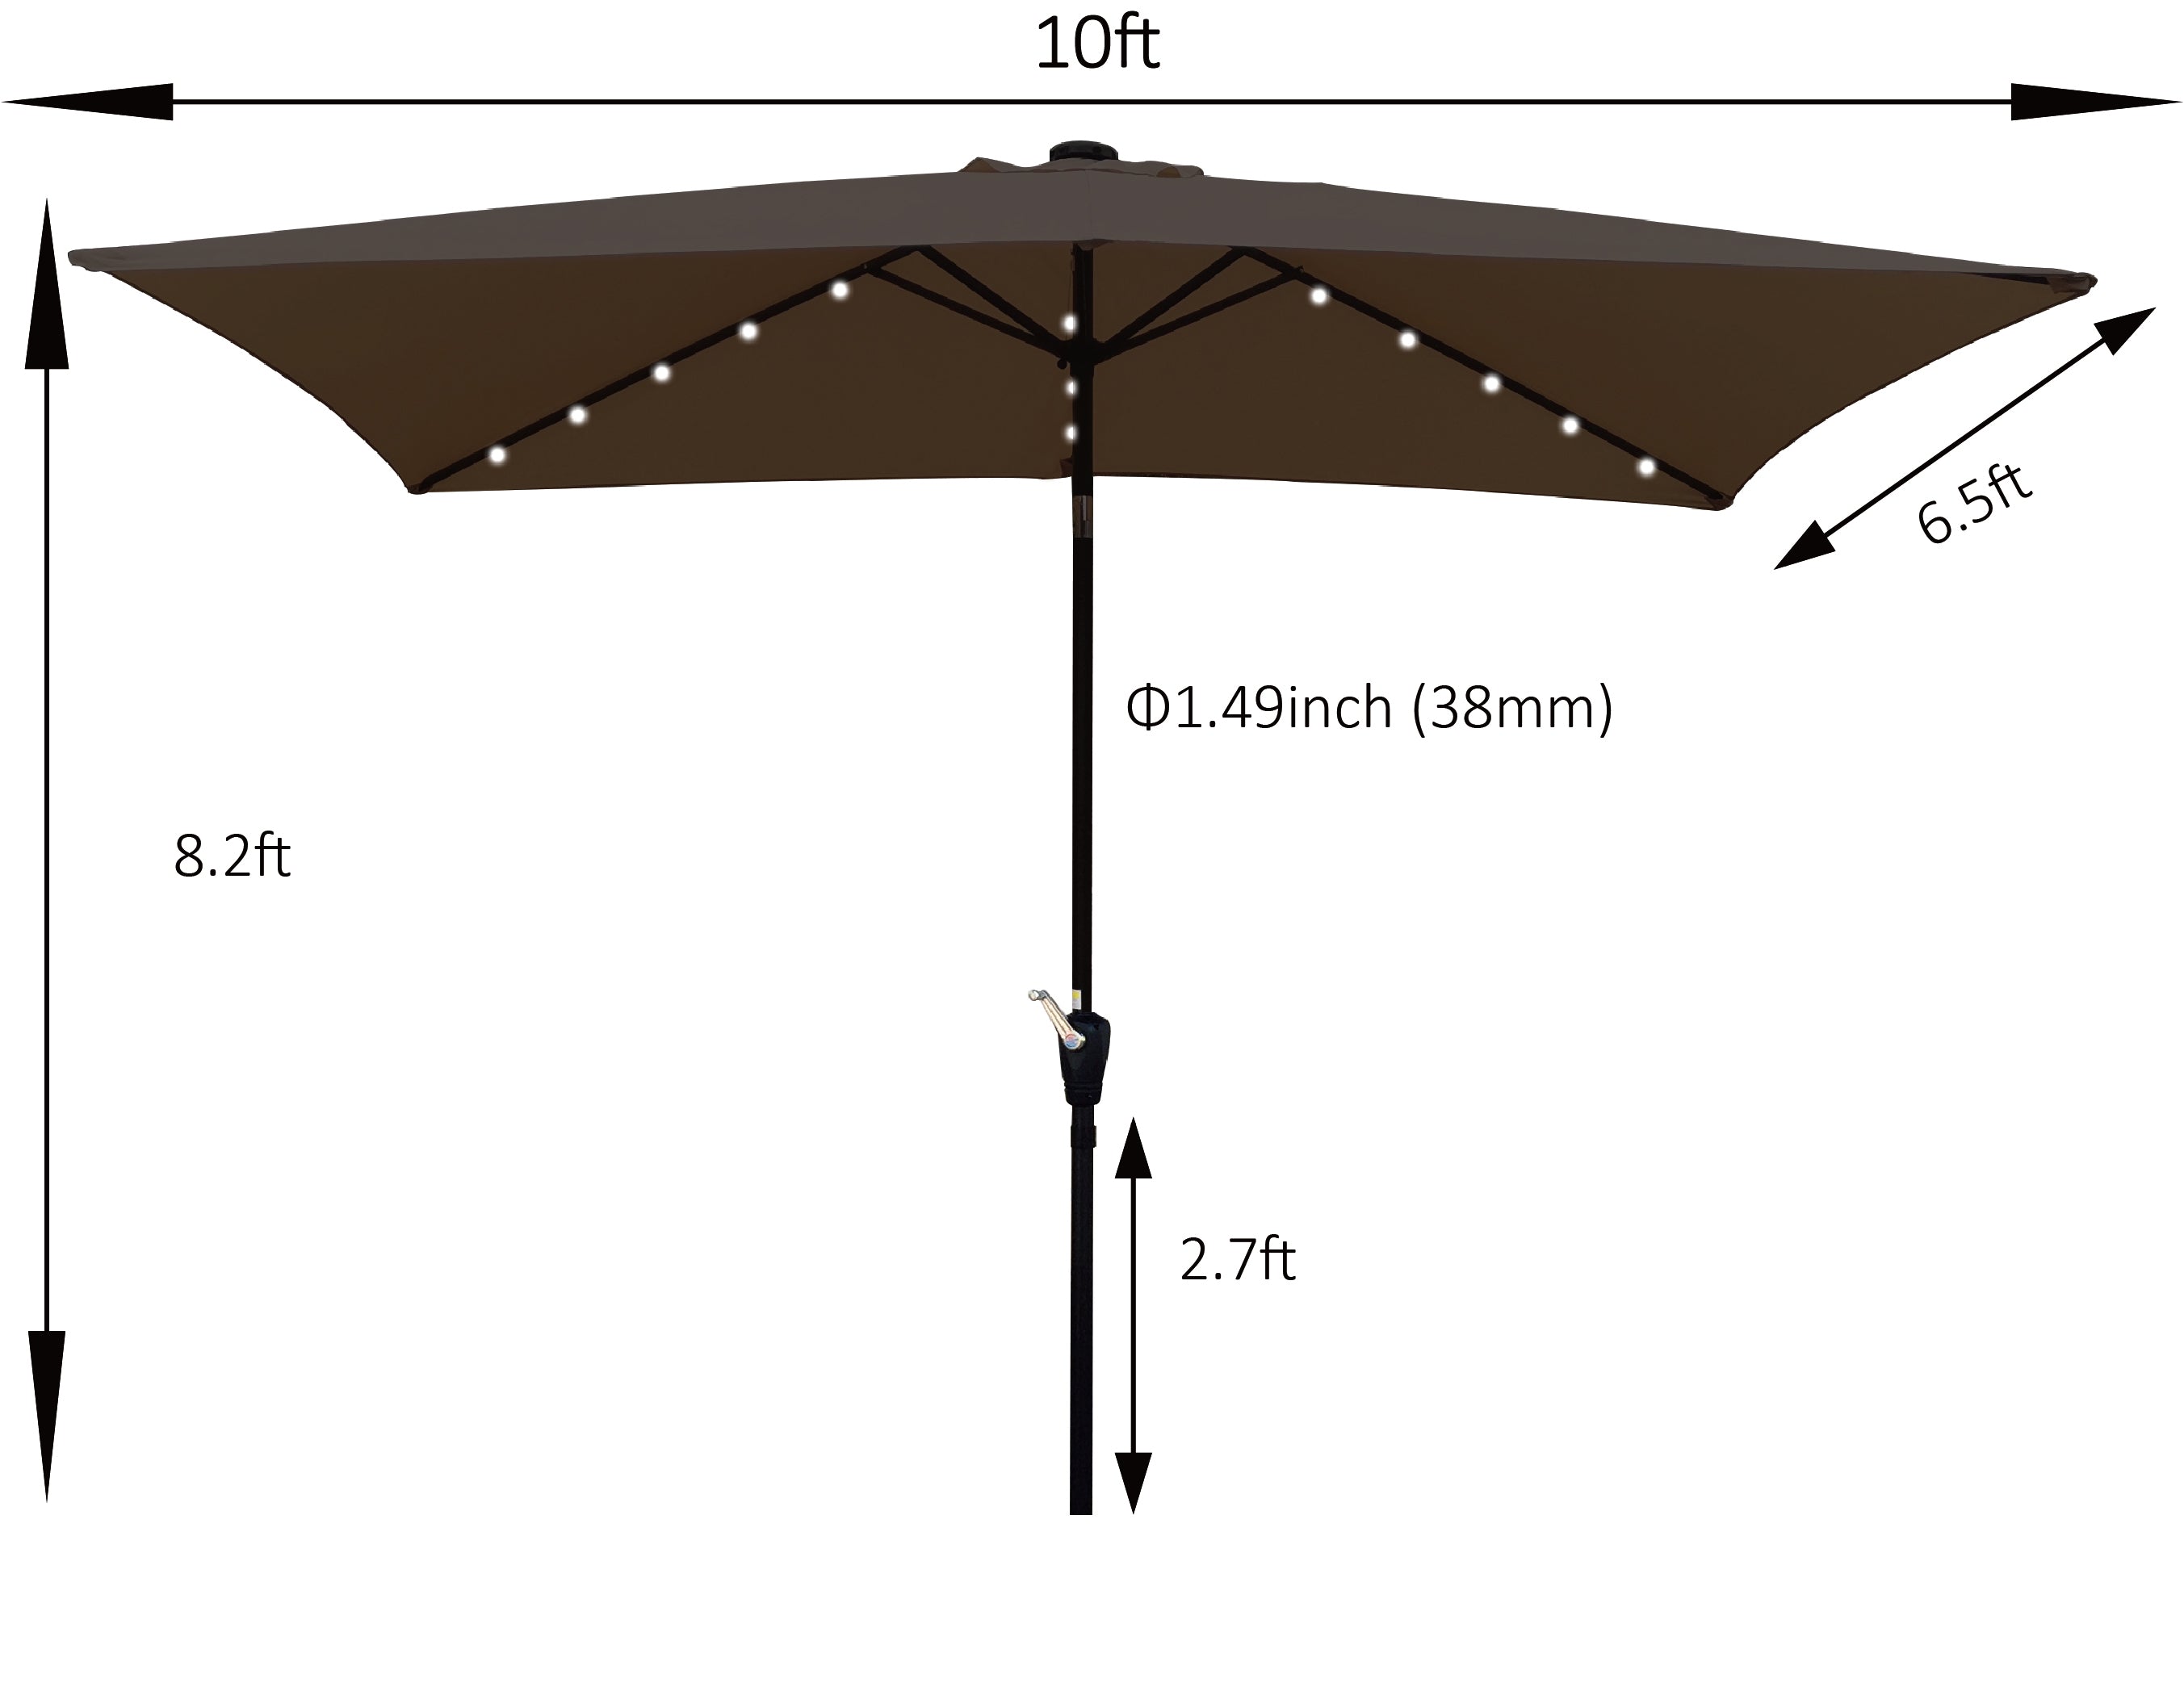 10 x 6.5t Rectangular Patio Umbrella Solar LED Lighted Outdoor Market Table Waterproof Umbrellas Sunshade with Crank and Push Button Tilt for Garden Deck Backyard Pool Shade Outside Deck Swimming Pool